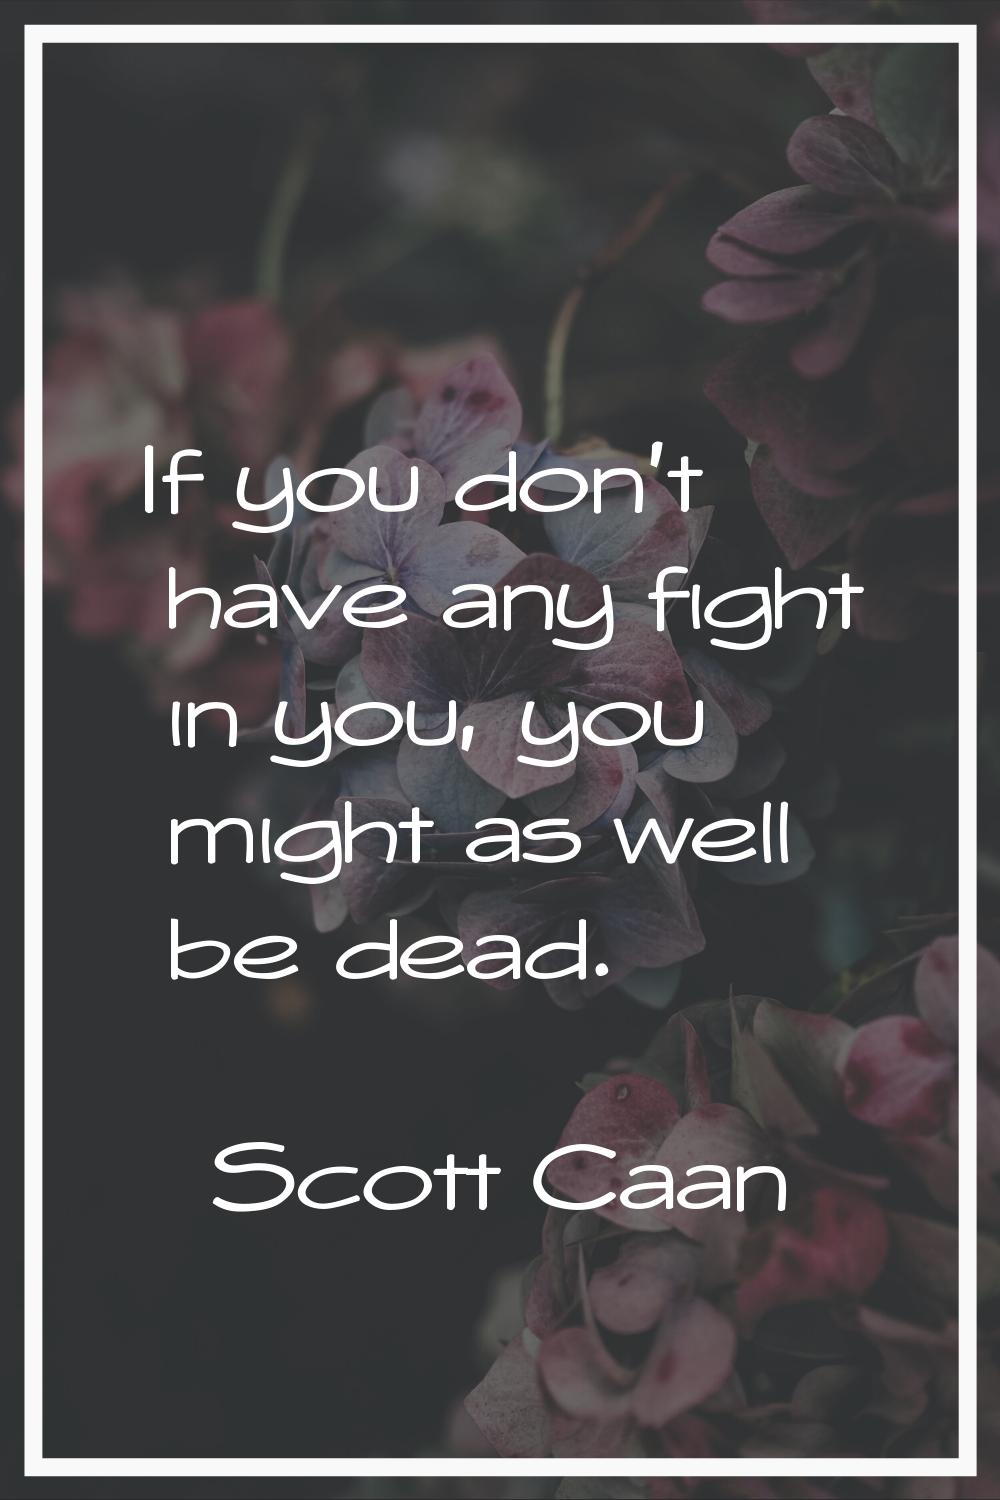 If you don't have any fight in you, you might as well be dead.